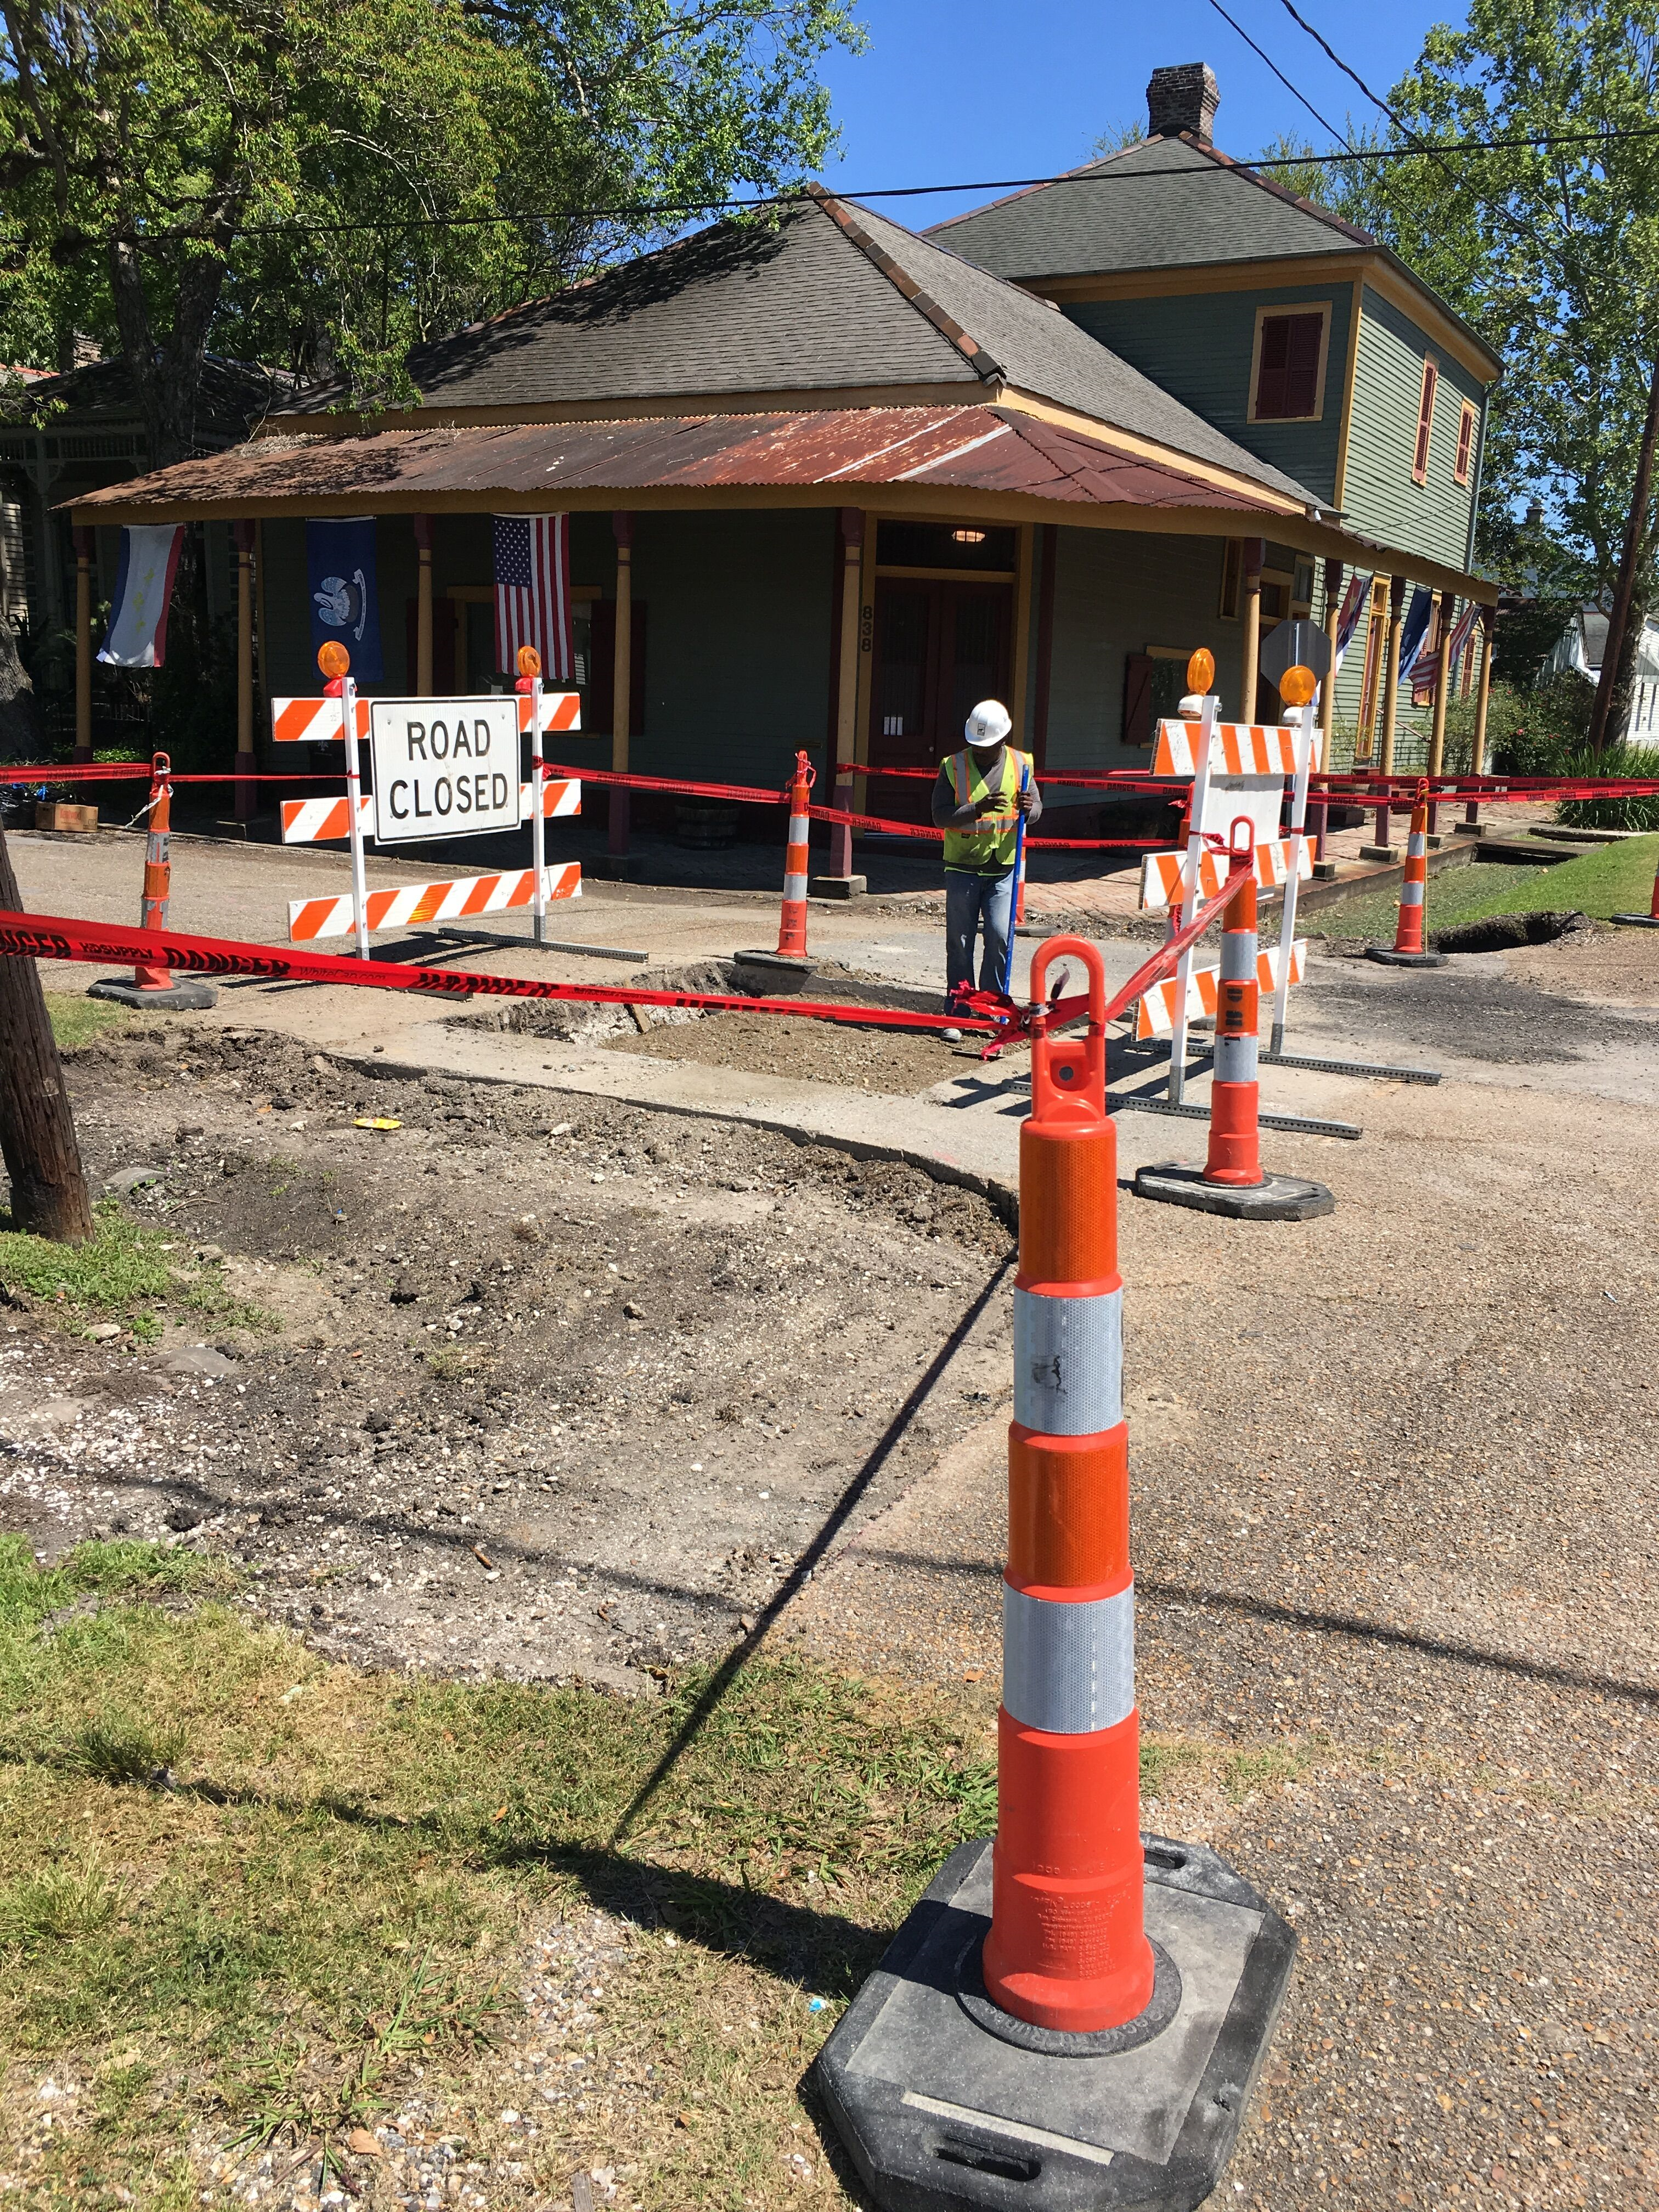 WESTBANK FEMA-FUNDED ROADWORK CONTINUES WITH $2 MILLION ADDED TO PROJECT SCOPE